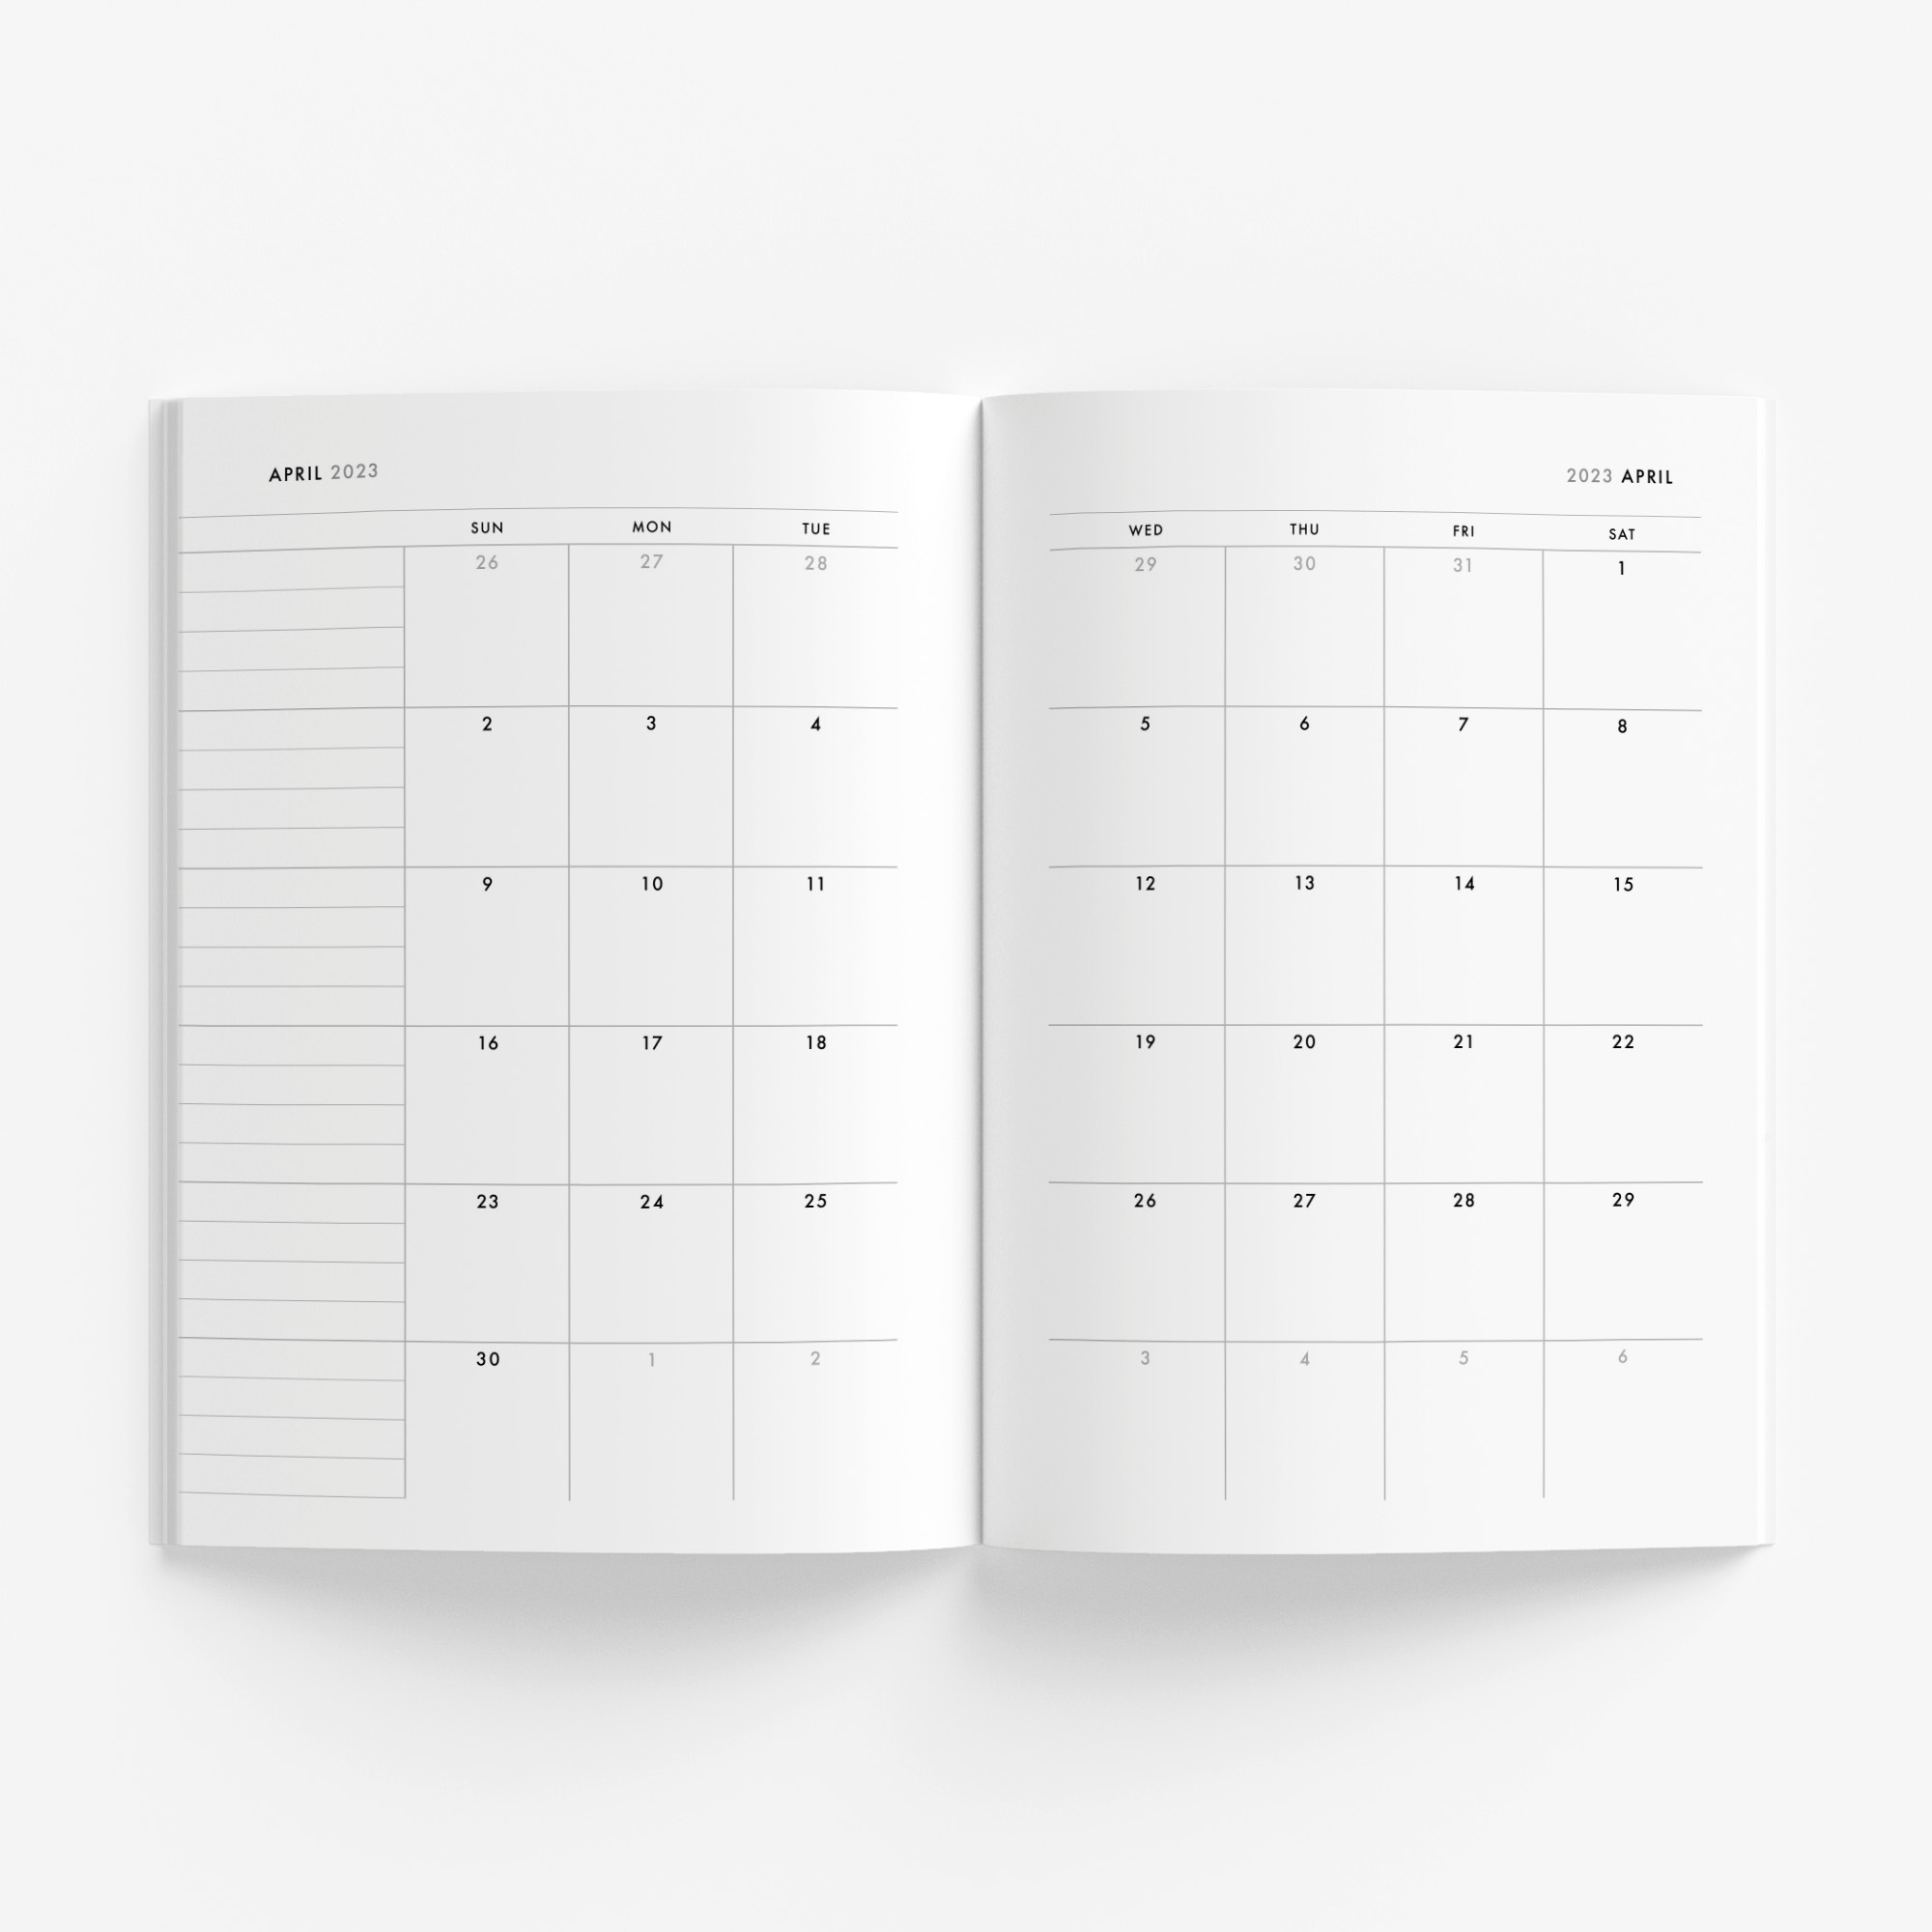 One-Year Weekly Planner (navy) – start any month